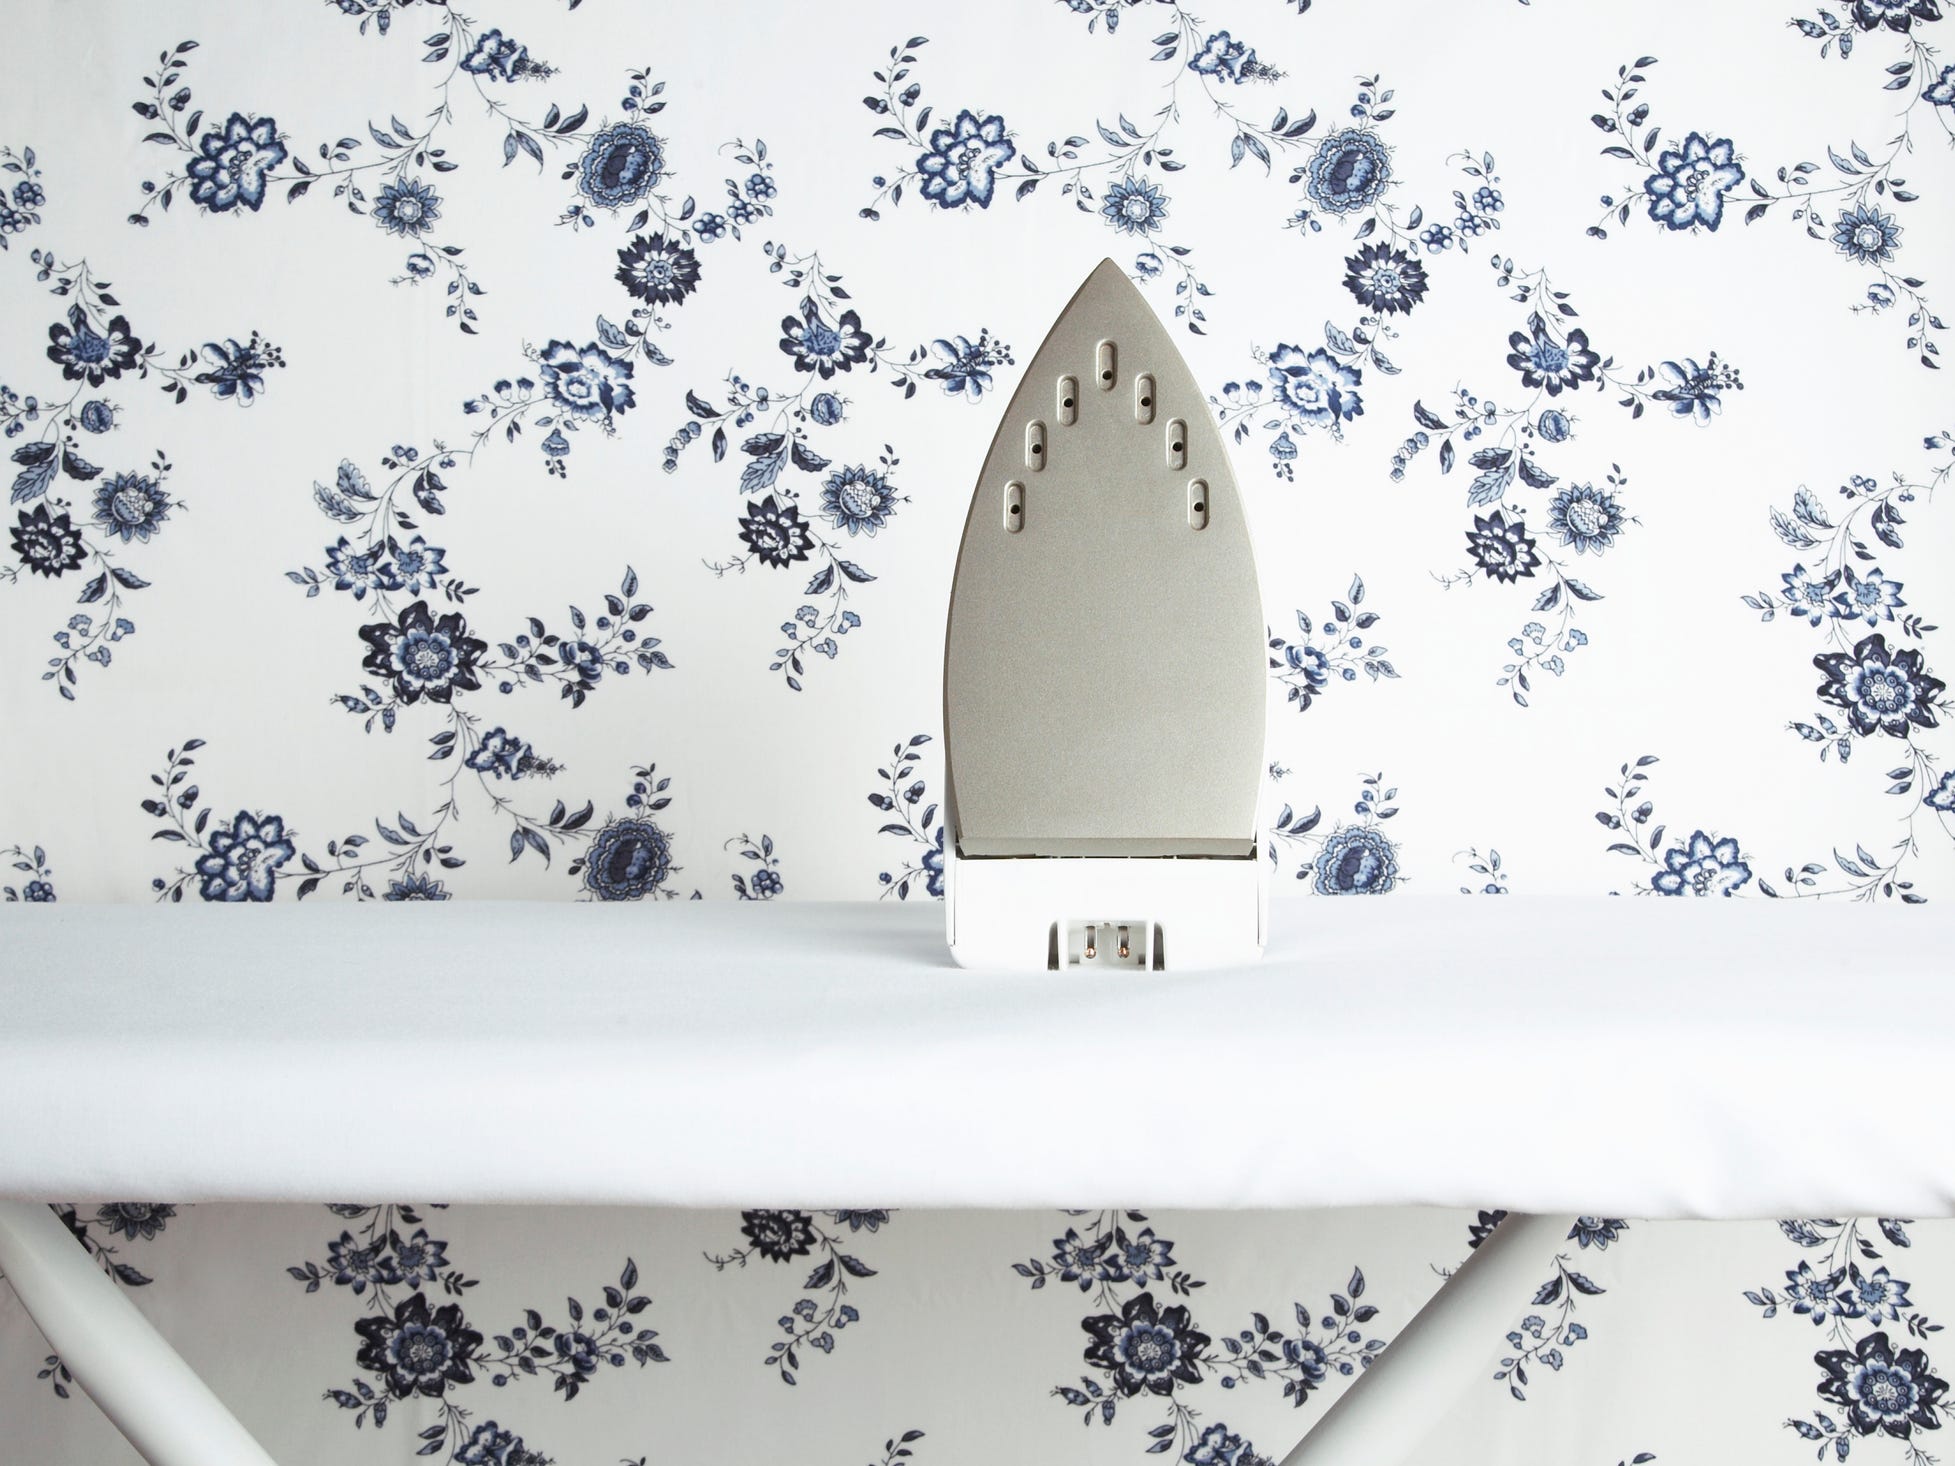 An iron sitting on an ironing board against a backdrop of floral wallpaper